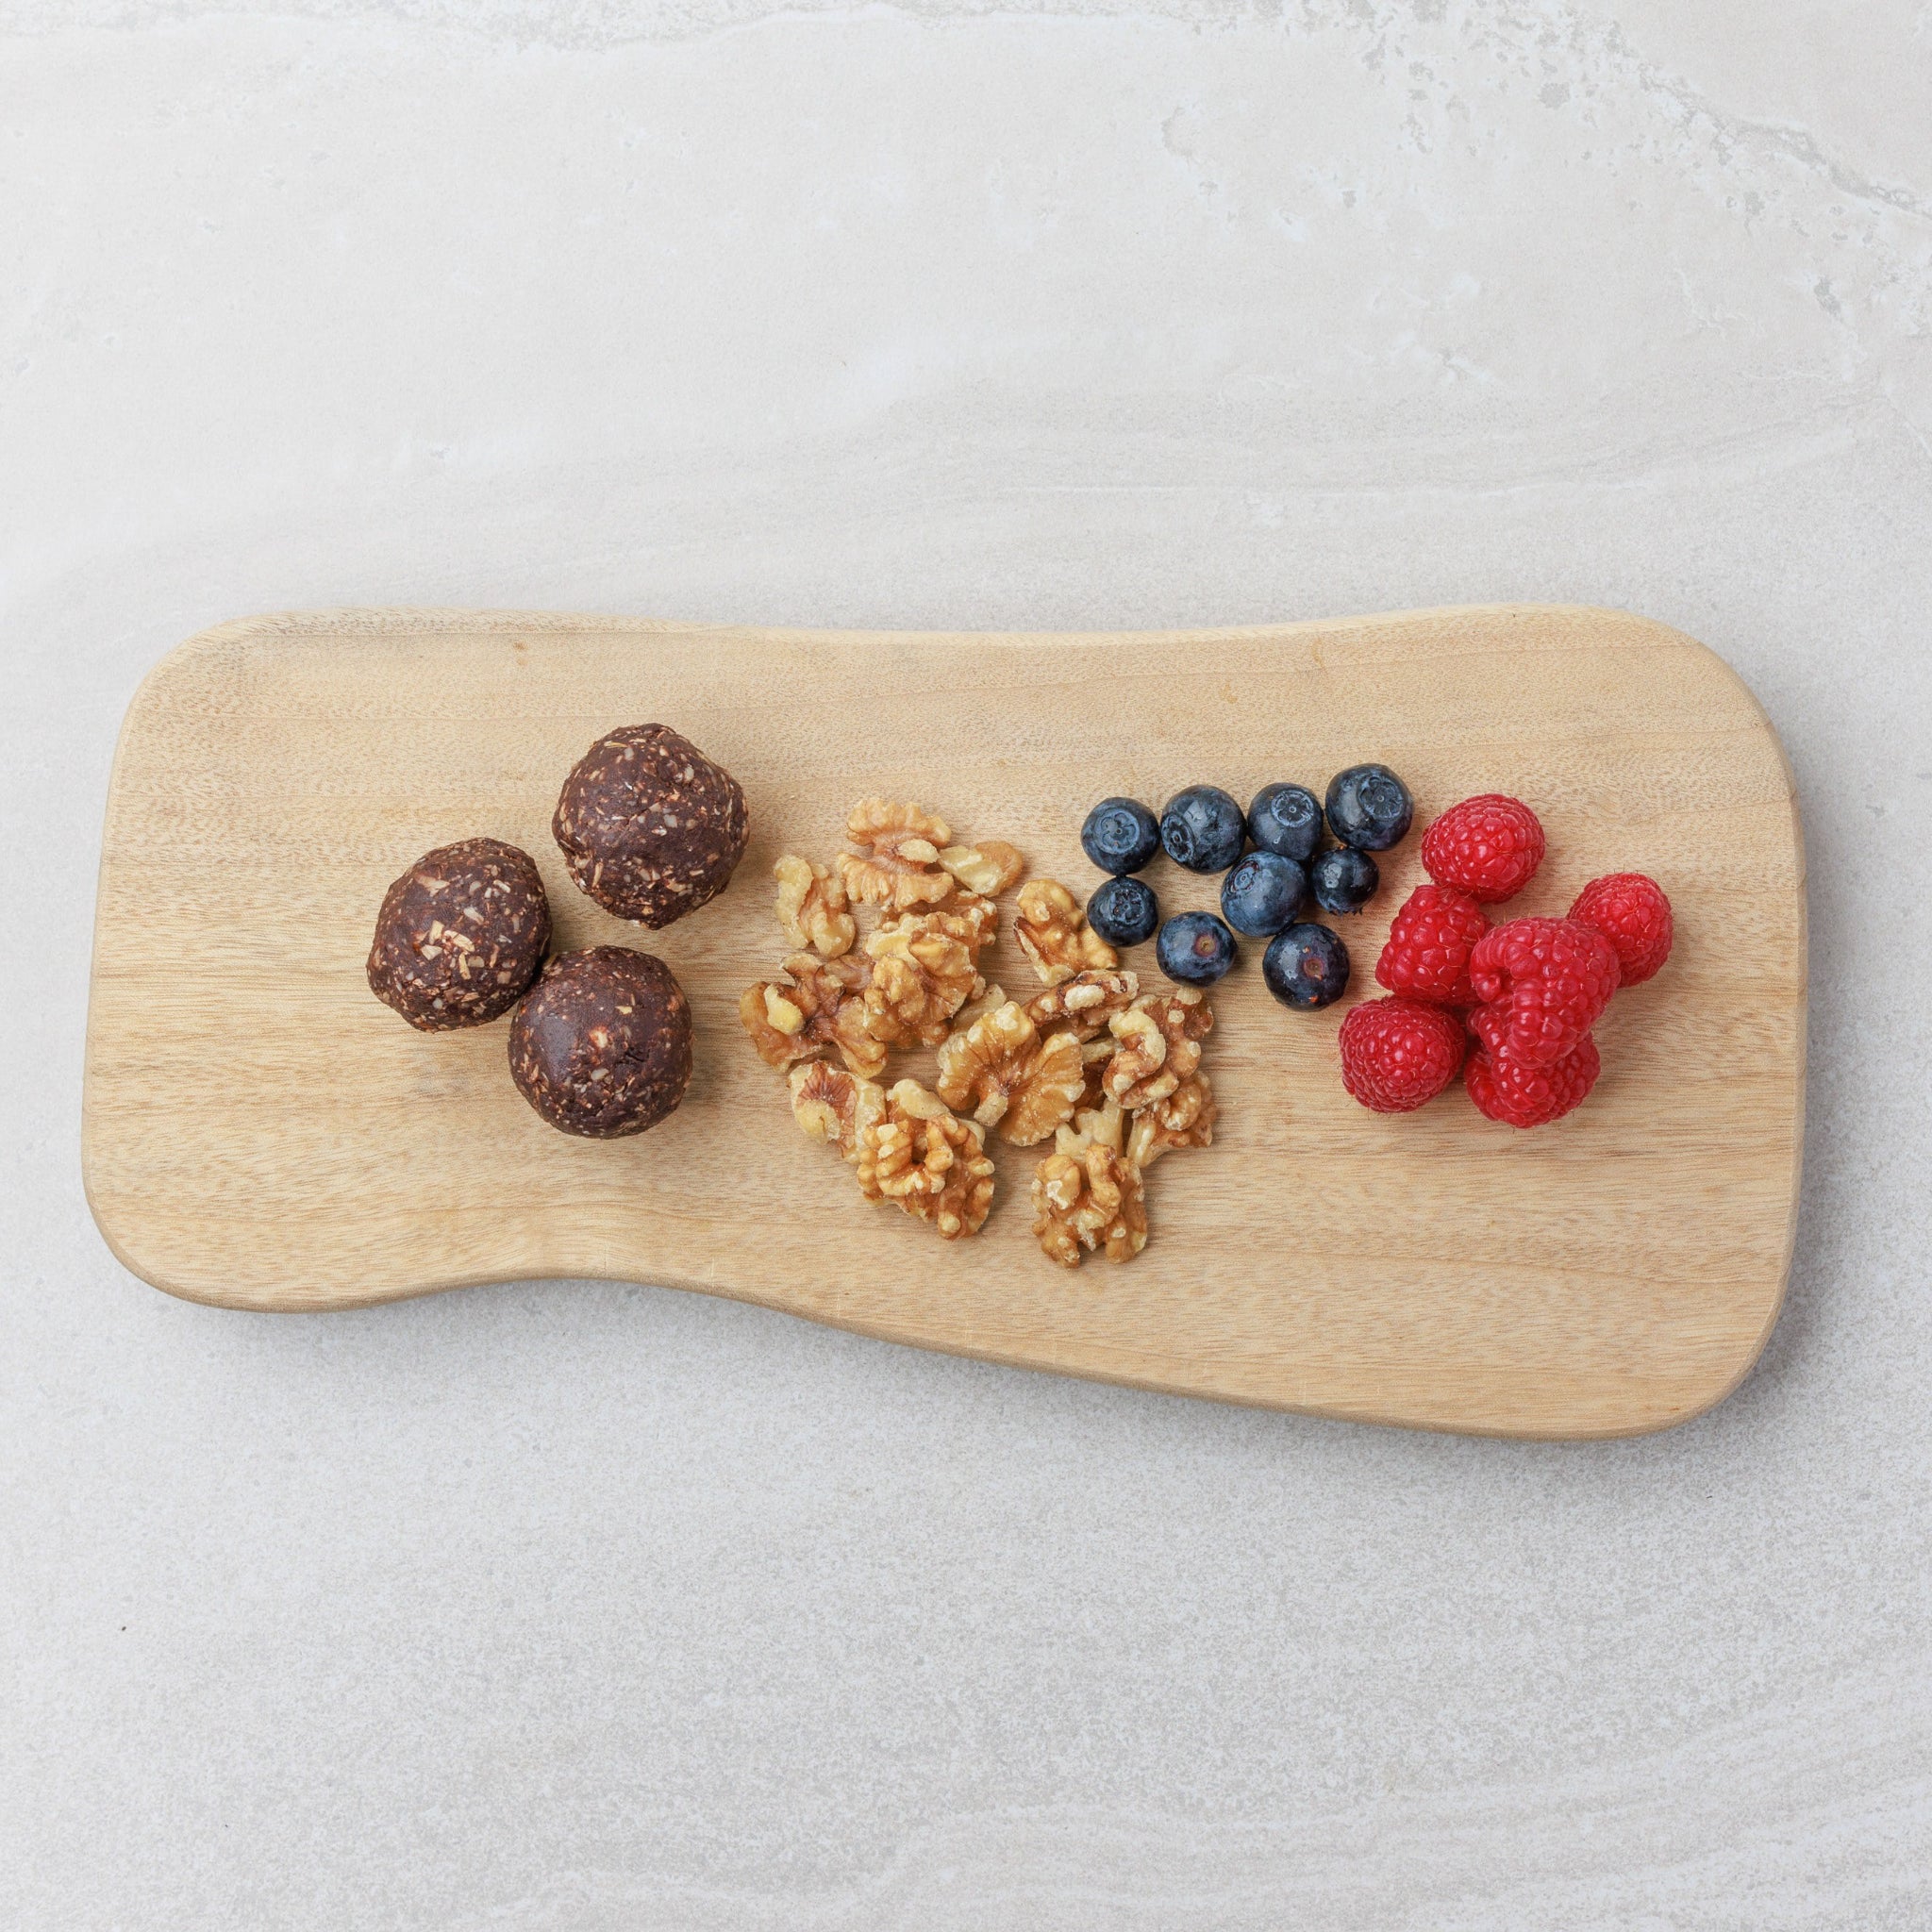 A plate of Raw Peppermint Chocolate Date Balls with fruit and nuts from Audrey and Alfie's Finger Food Range